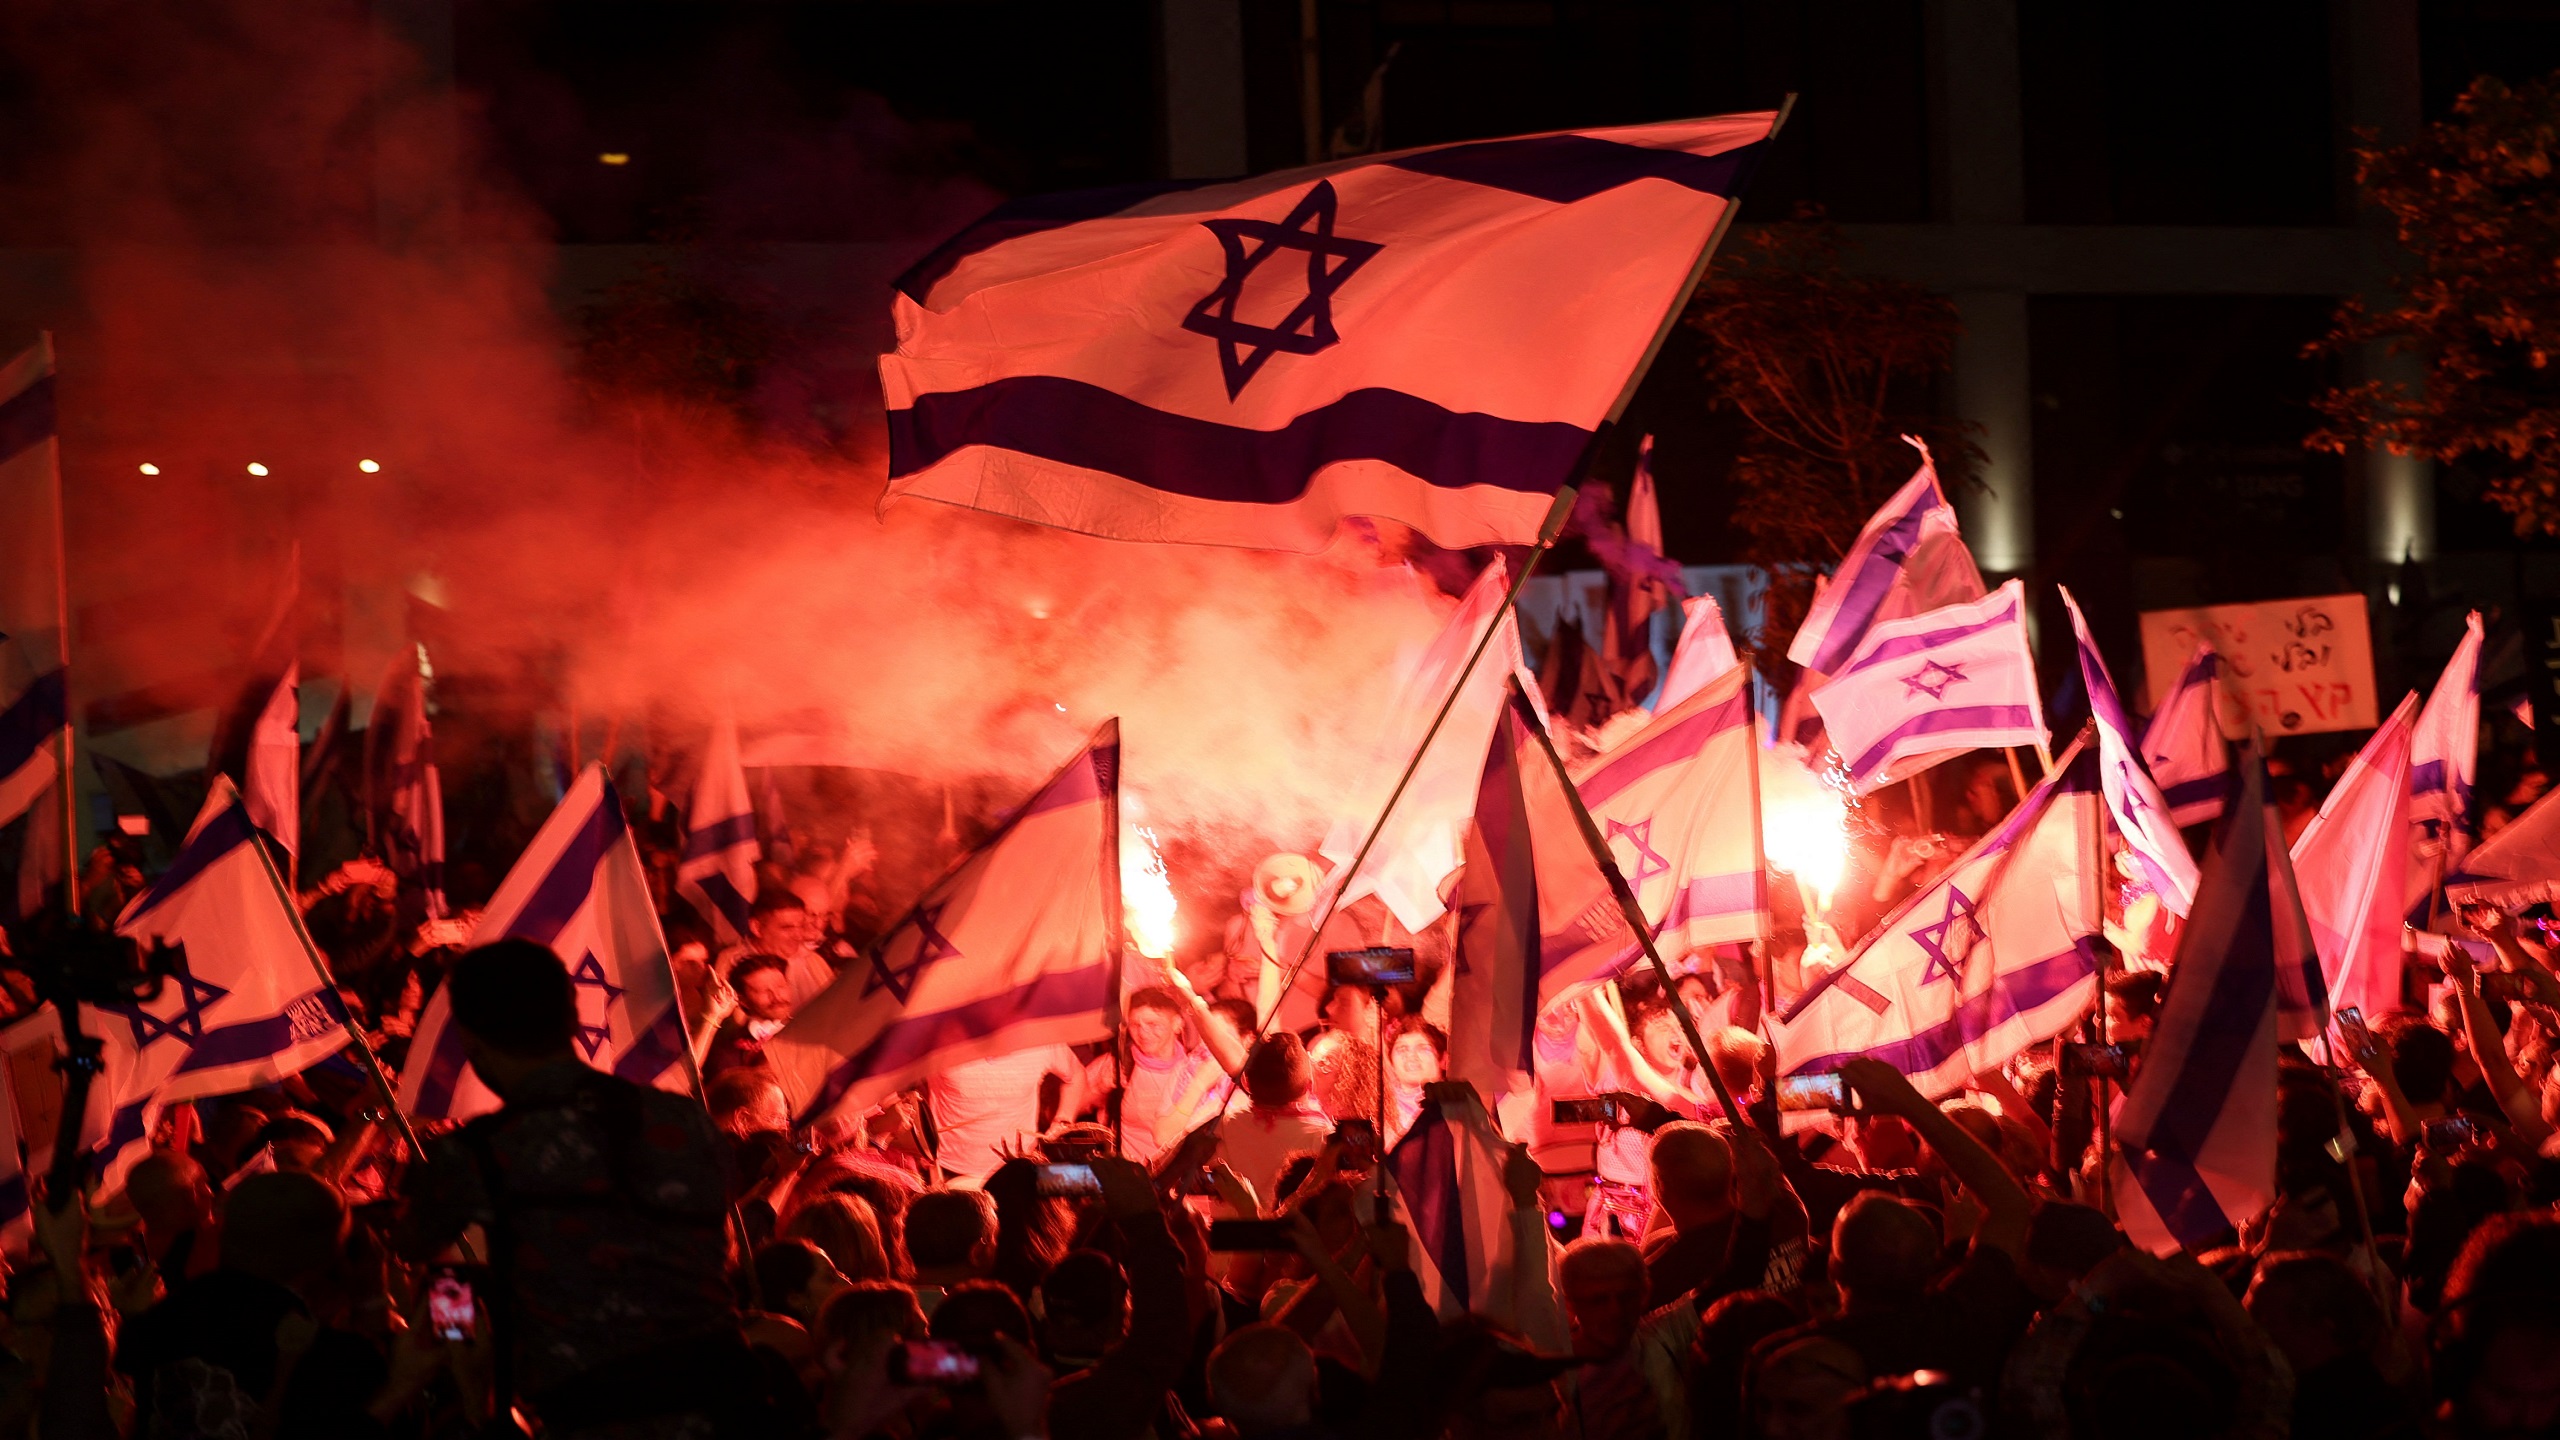 Israel Celebrates 75th Independence Day Amid Protests, Political